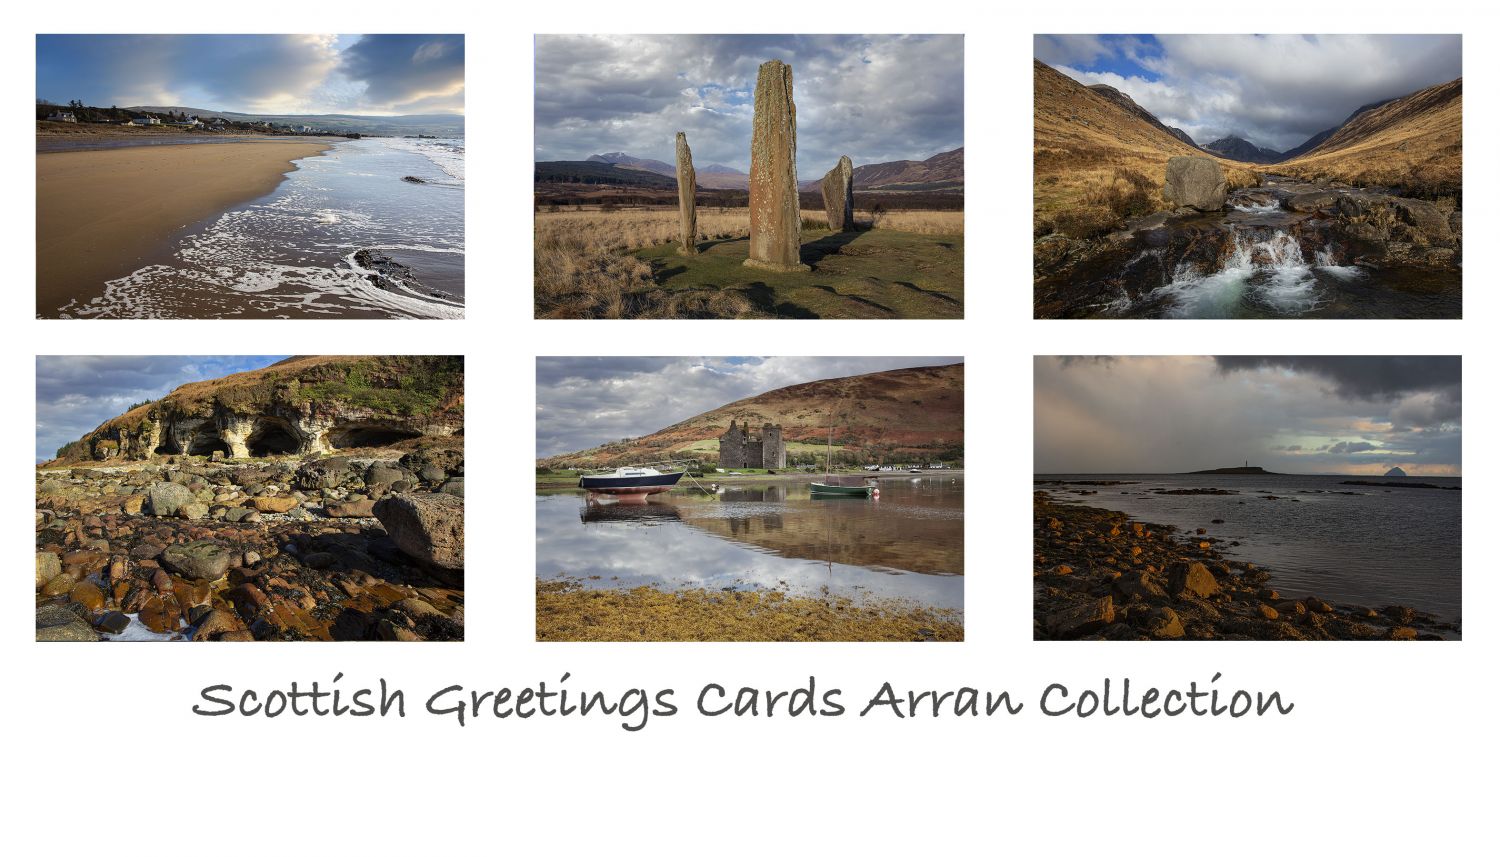 Scottish Greetings Cards Arran Collection by Martin Lawrence